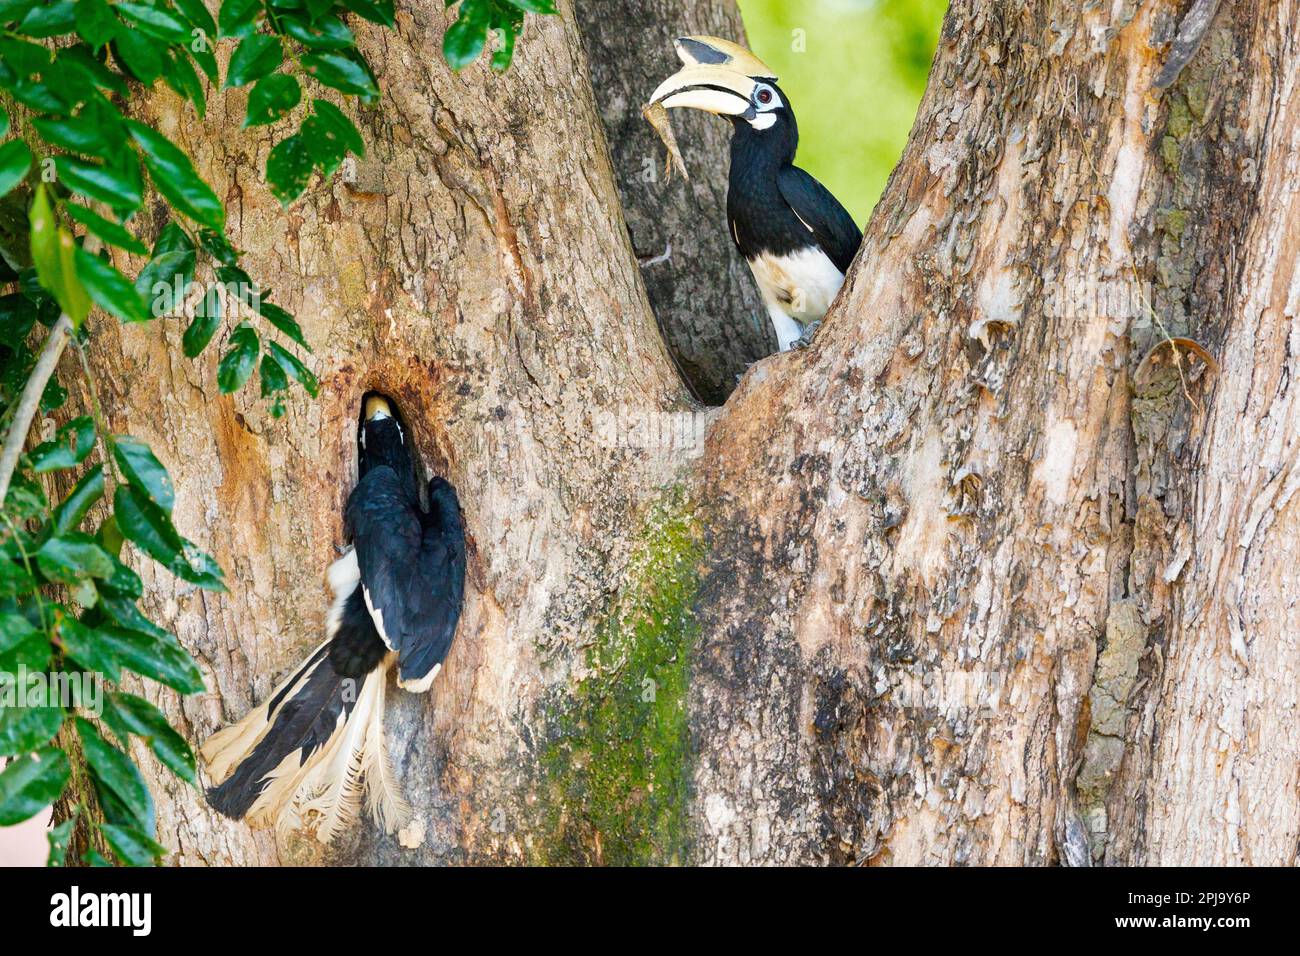 Adult male oriental pied hornbill brings changeable lizard to entice the female to build a nest inside hole of an Angsana tree, Singapore Stock Photo